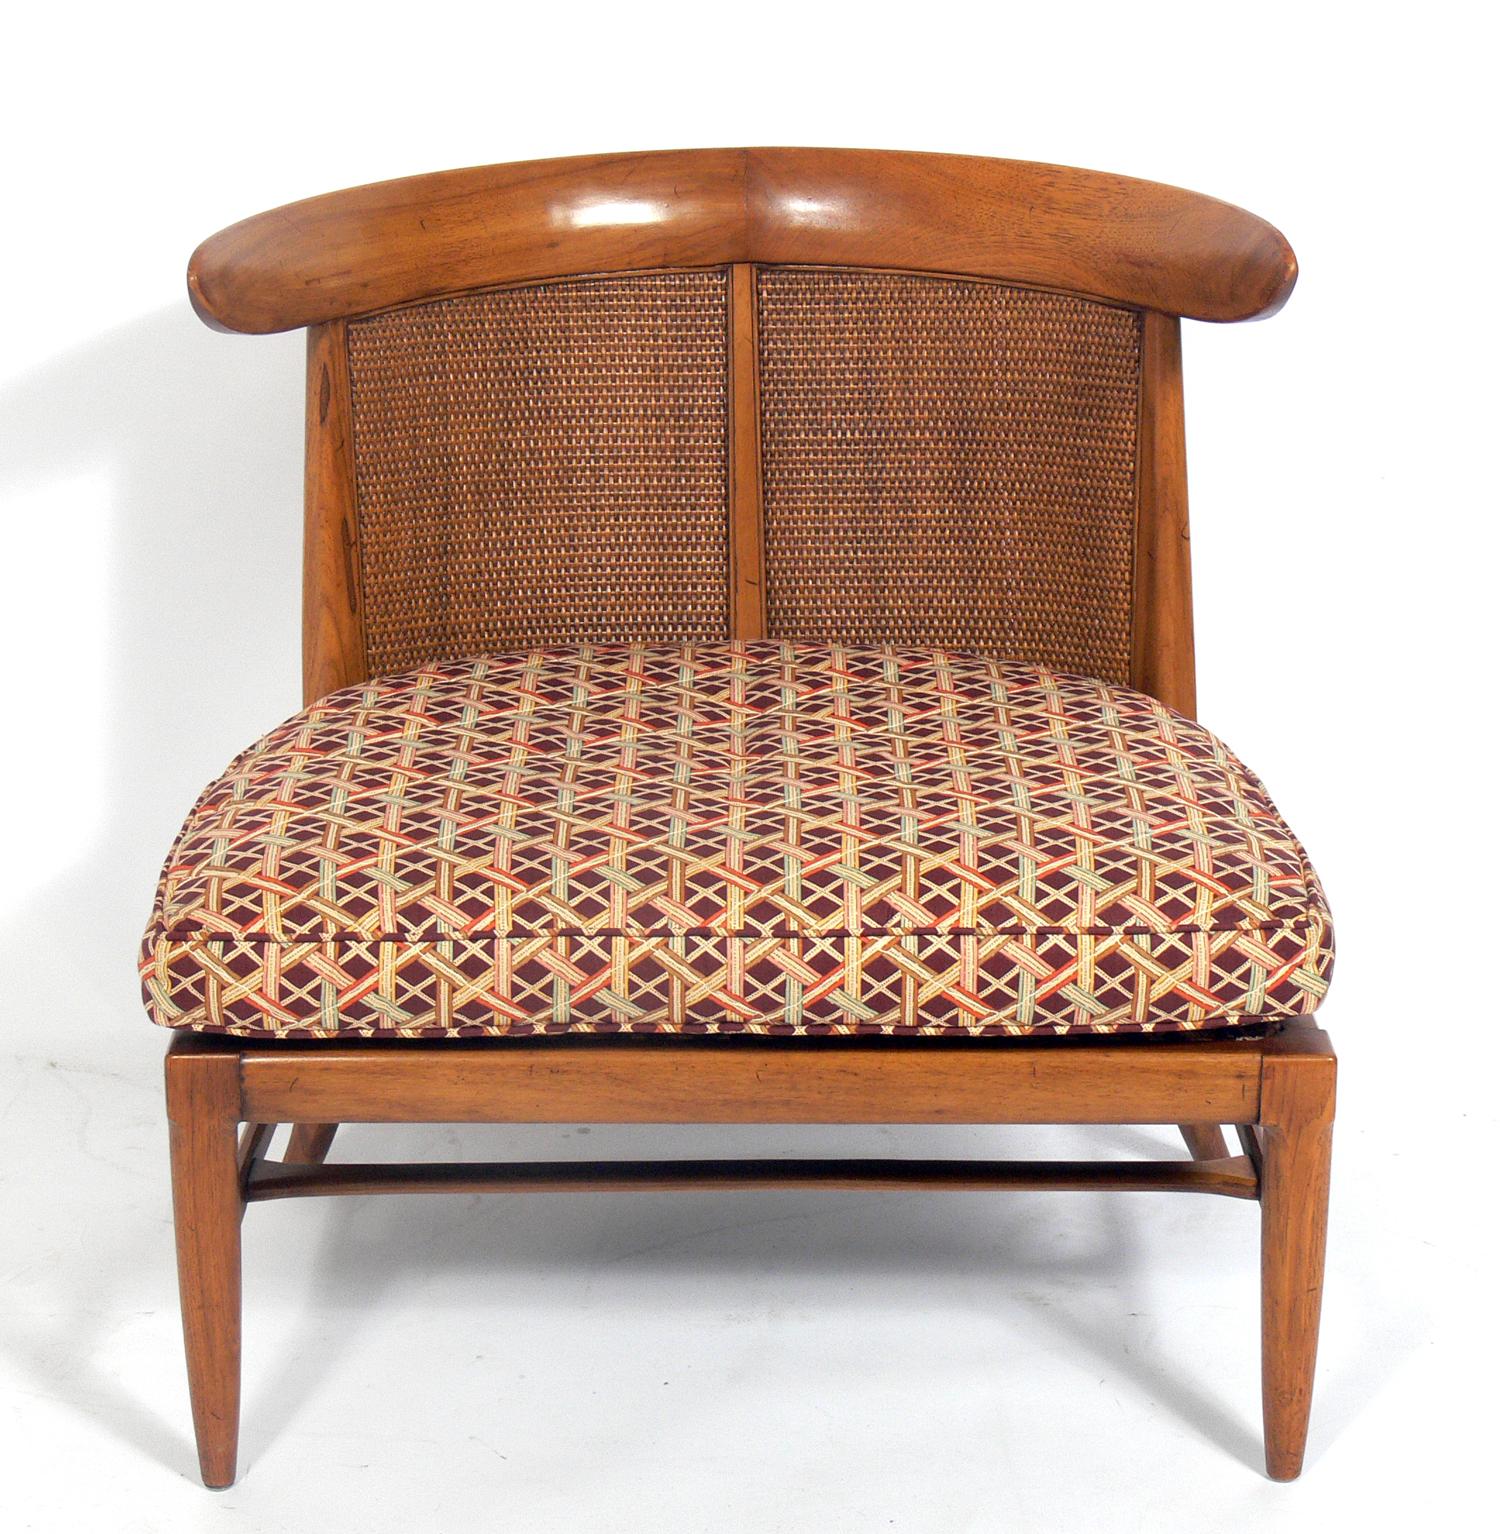 Pair of curvaceous caned back slipper chairs, designed by John Lubberts and Lambert Mulder for Tomlinson, American, circa 1950s. Designed for Tomlinson's 